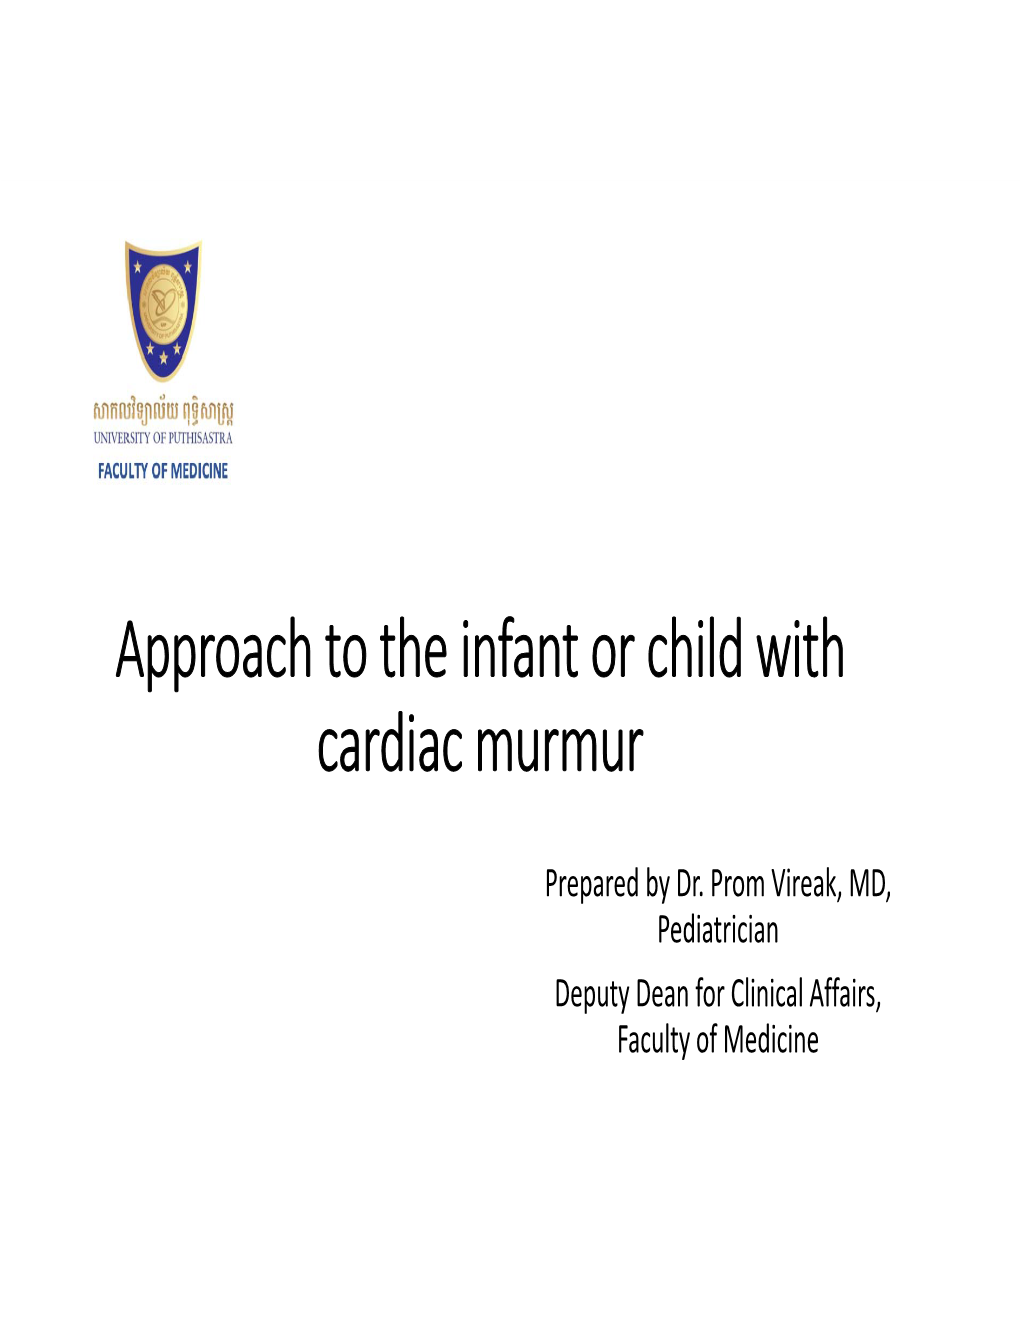 Approach to the Infant Or Child with Cardiac Murmur